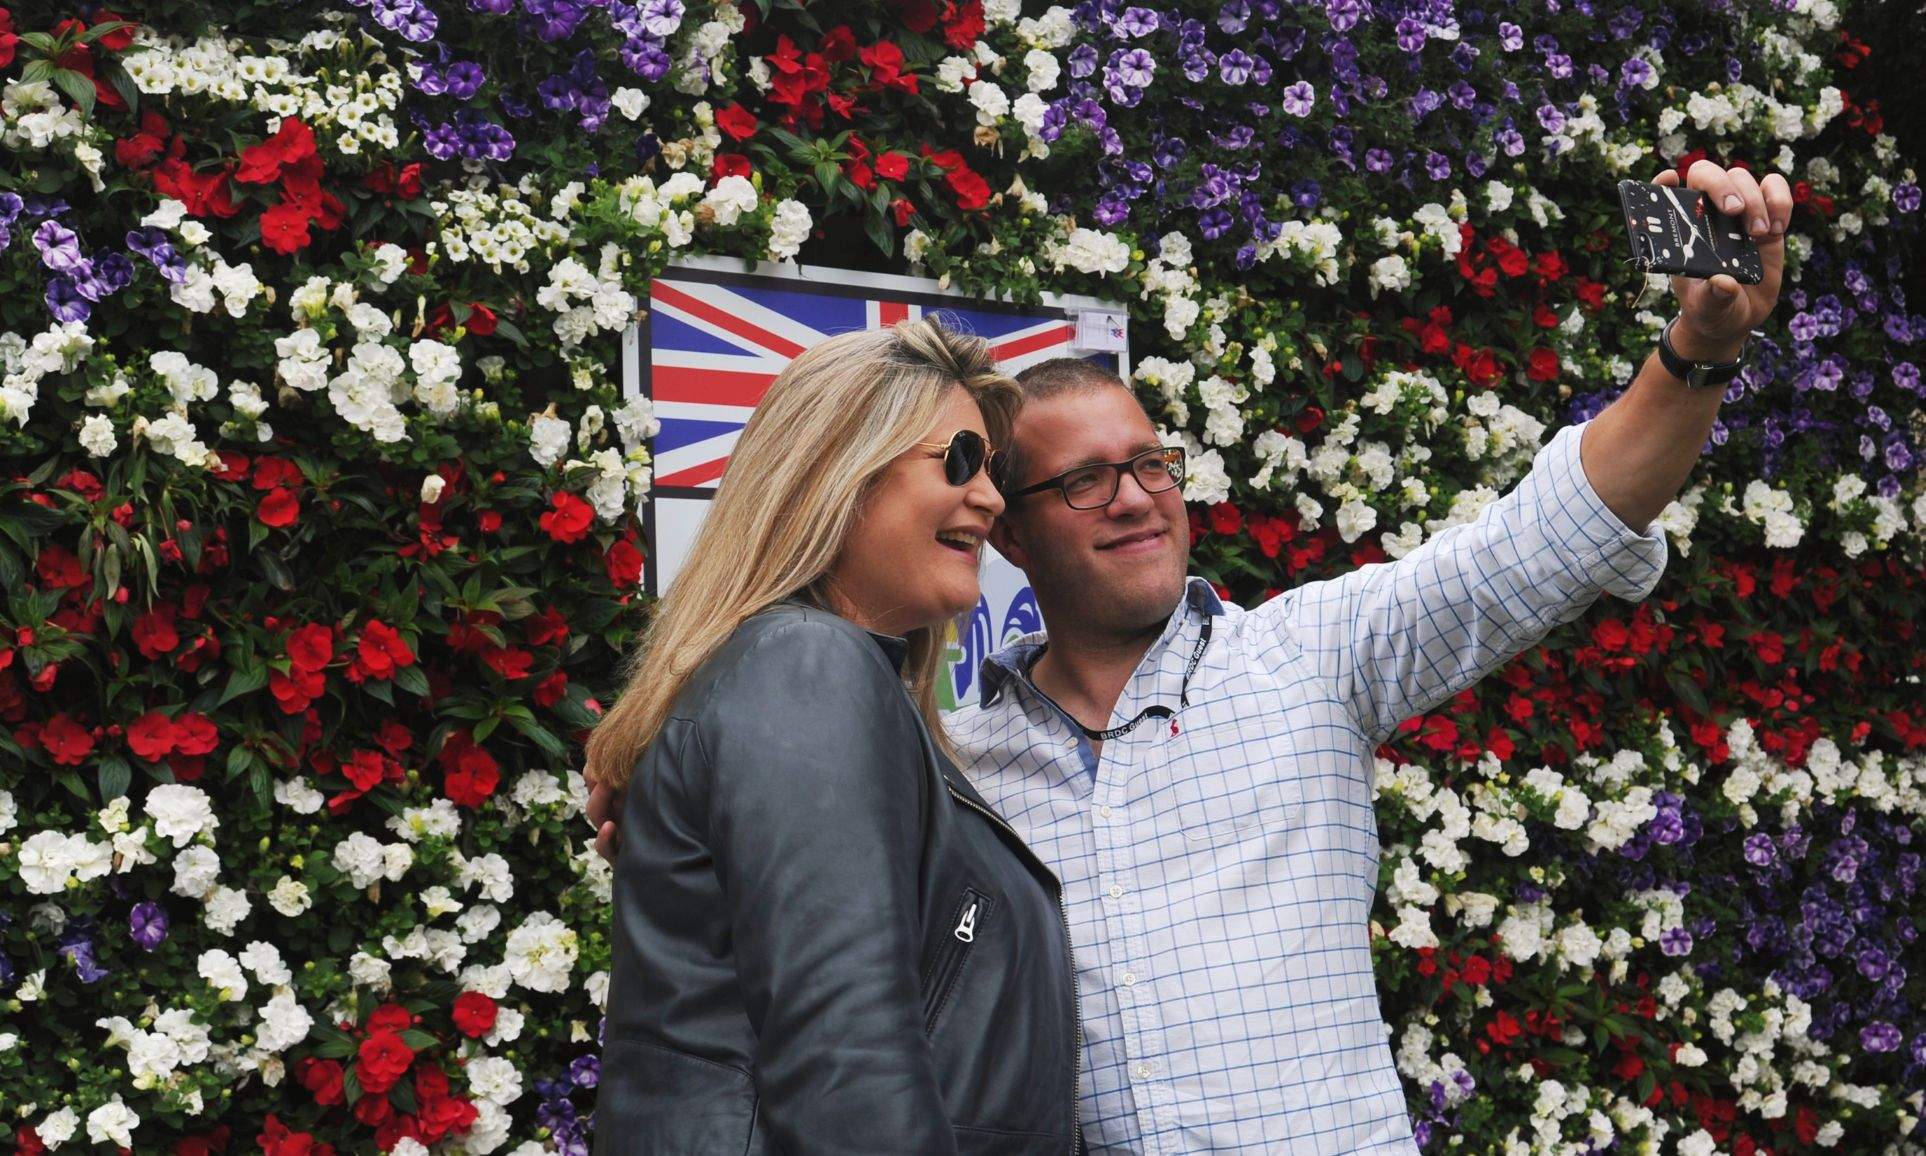 This is an image of a couple taking a selfie in front of a Union Jack designed Wonderwall living wall at Silverstone.